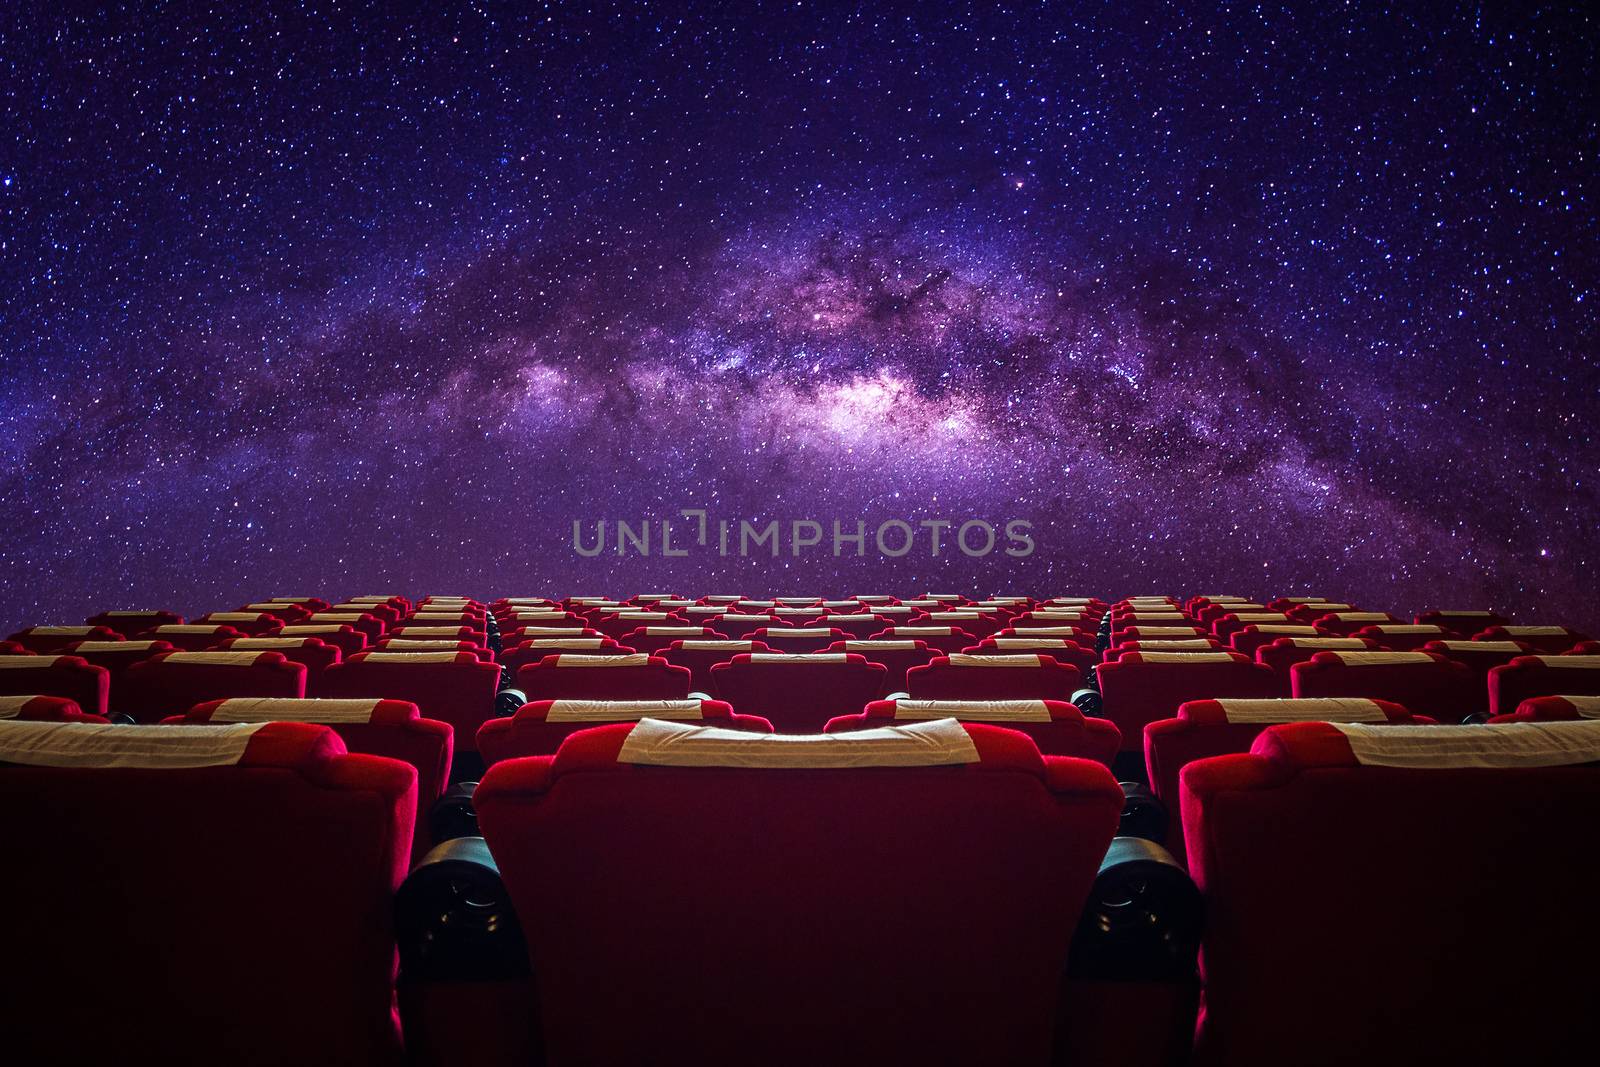 Cinema hall with red seat in Milky way galaxy.